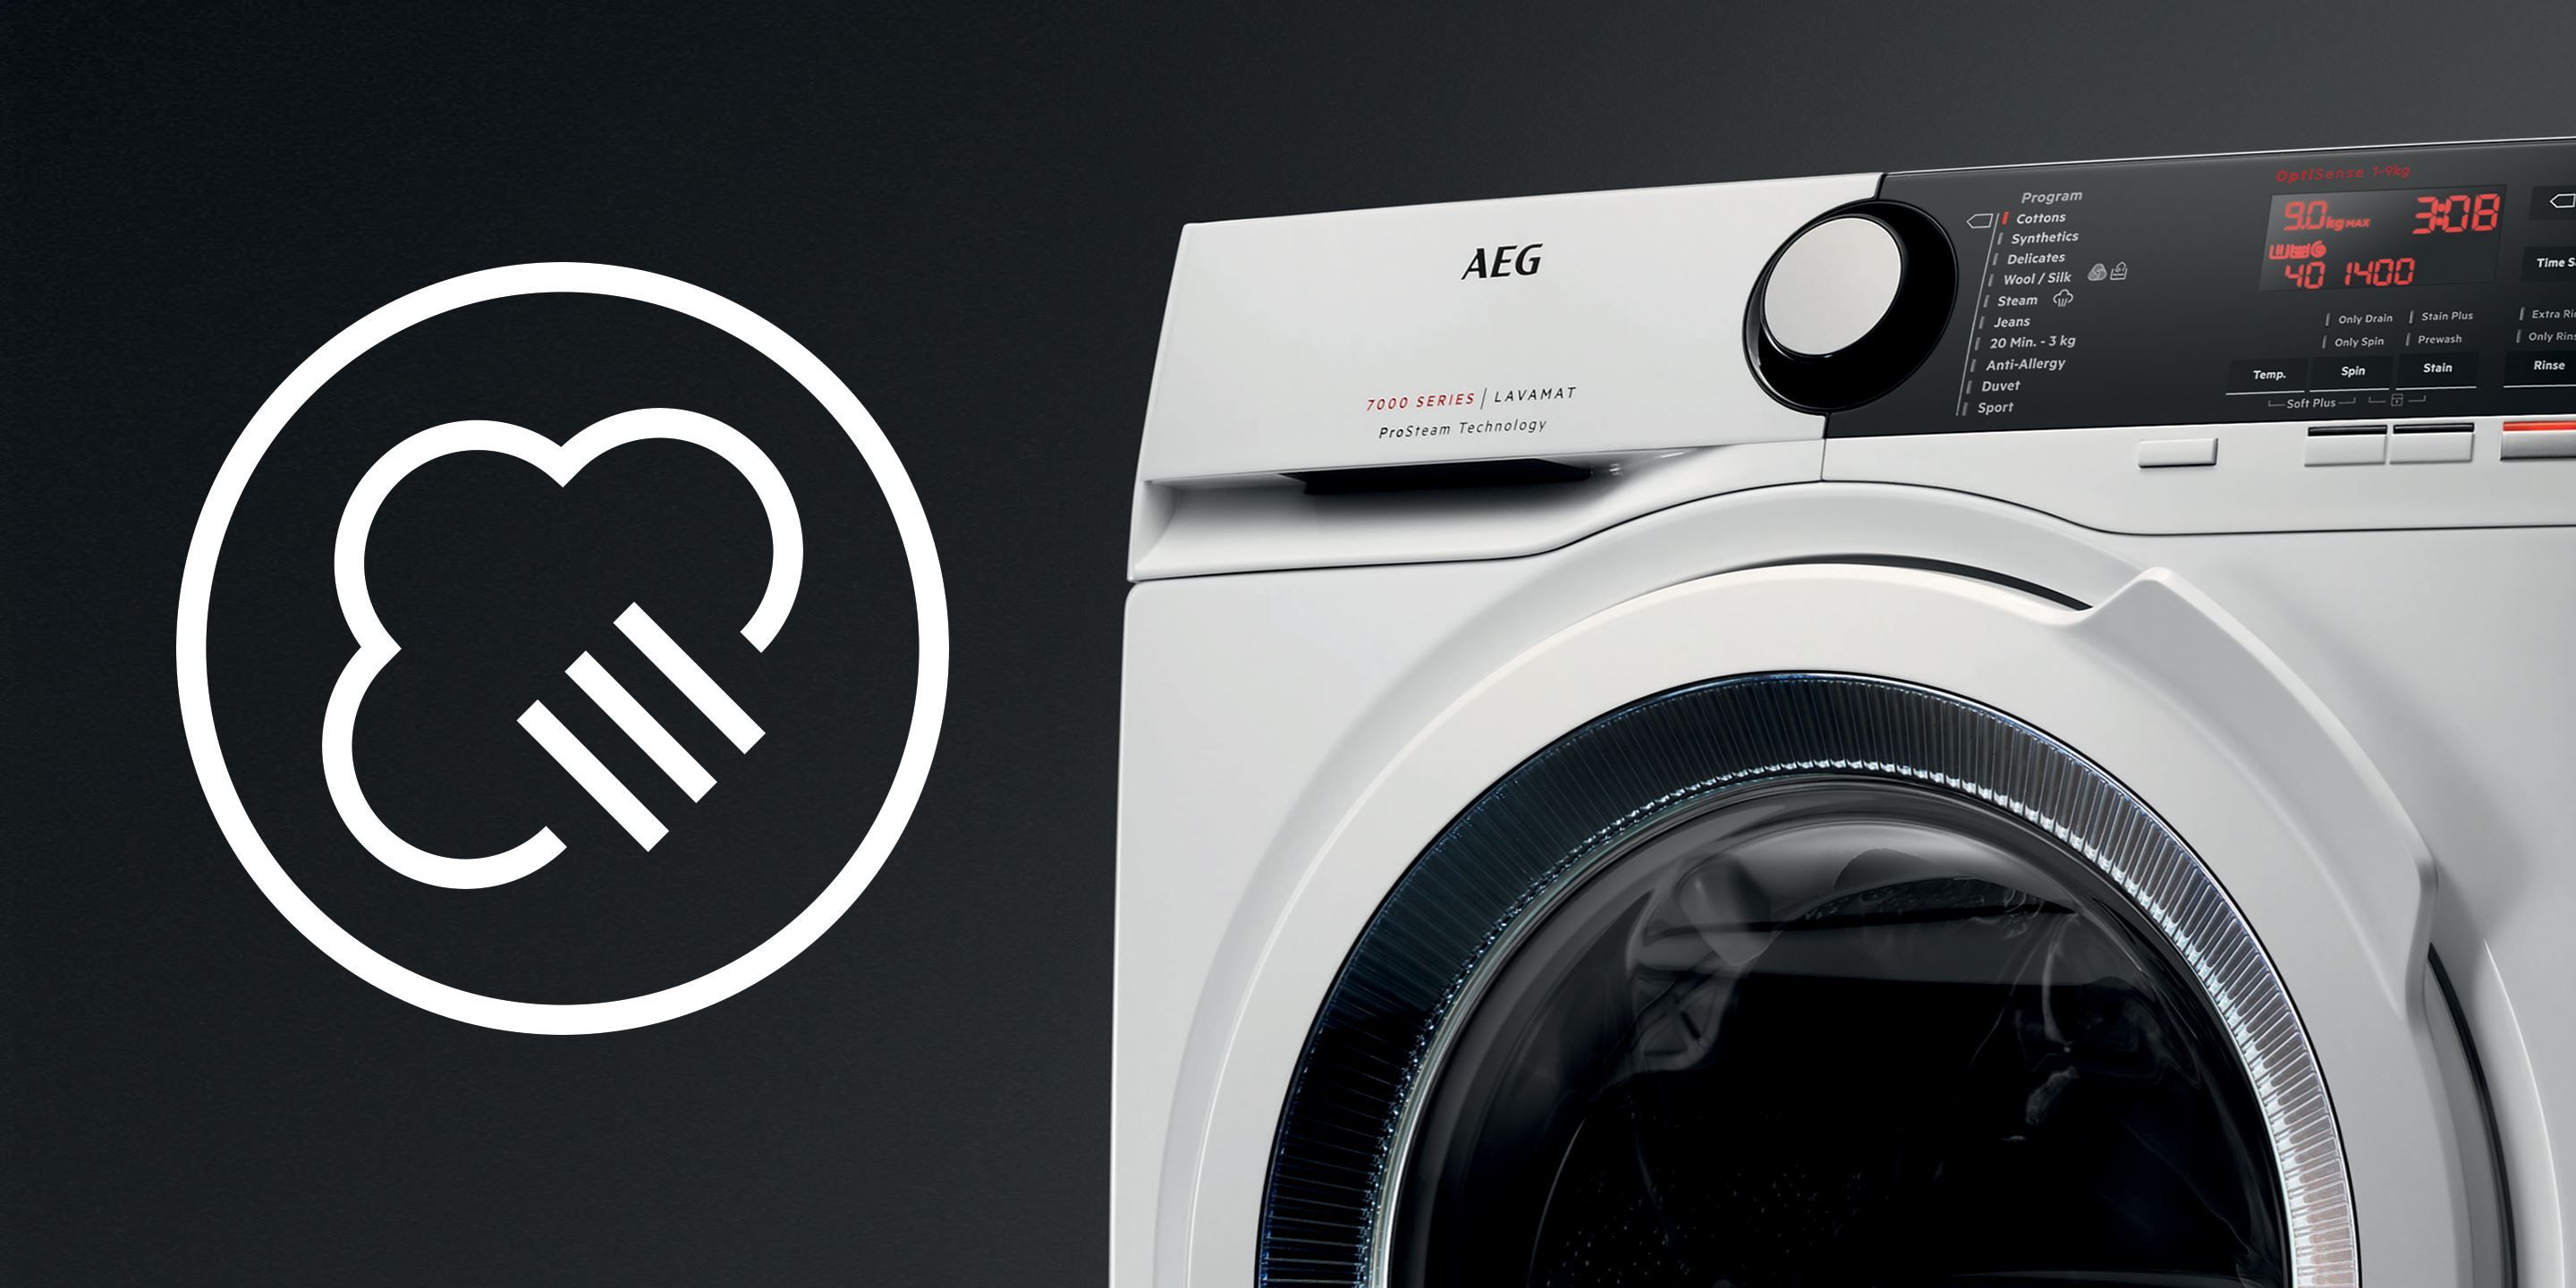 AEG SoftPlus Technology: Ensures Soft and Clean Clothes Every Time